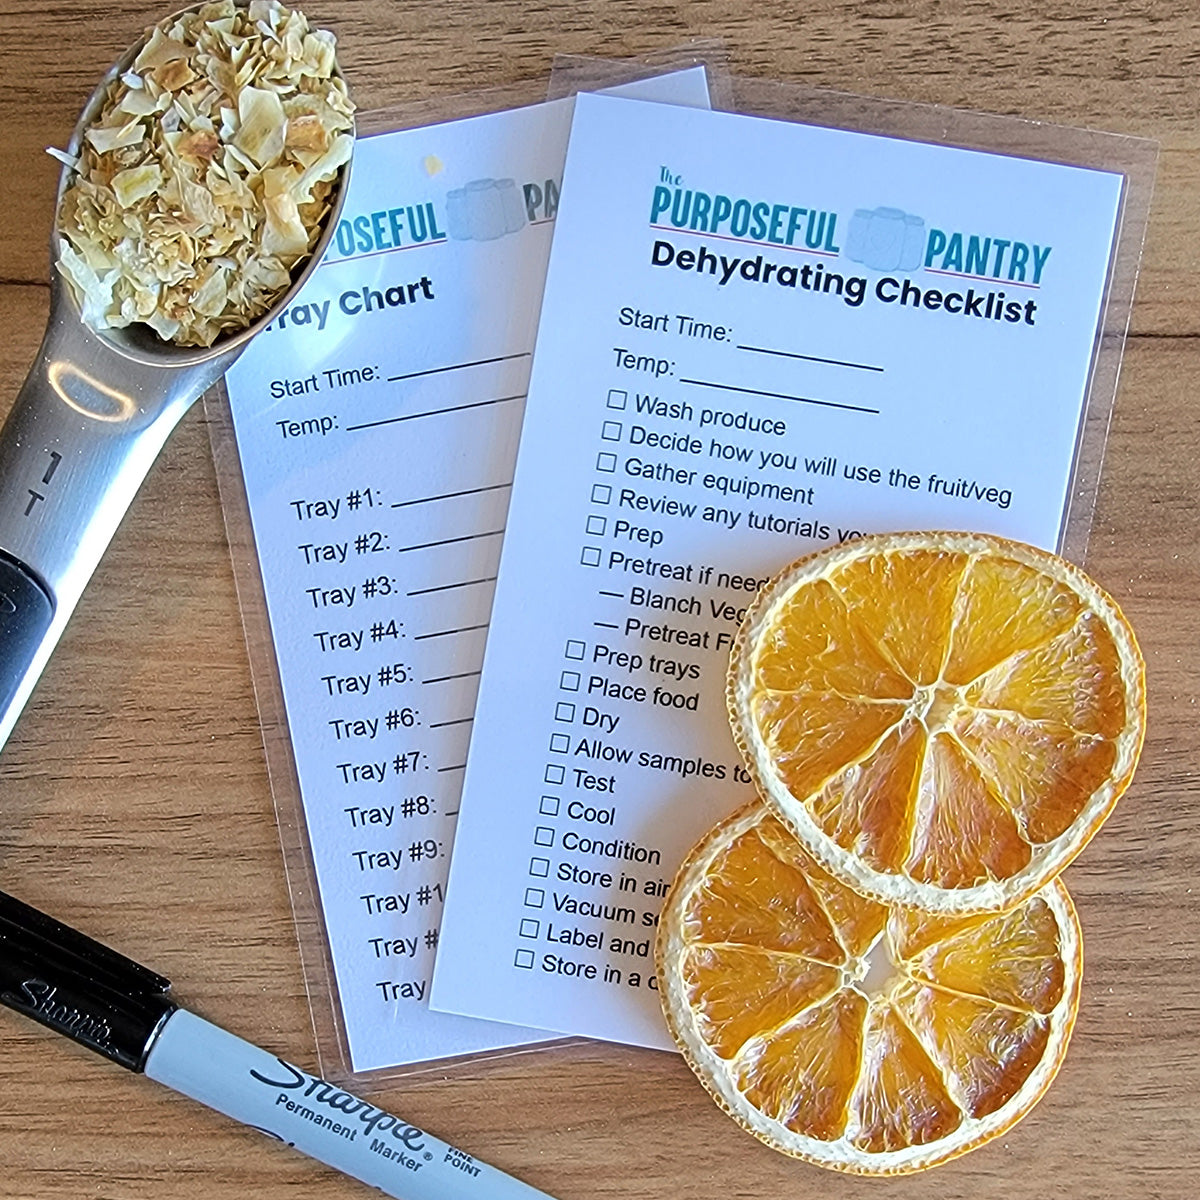 A table with Dehydrating Temperature Guides & Checklist from The Purposeful Pantry, a spoon, and a dry-cleaning checklist.